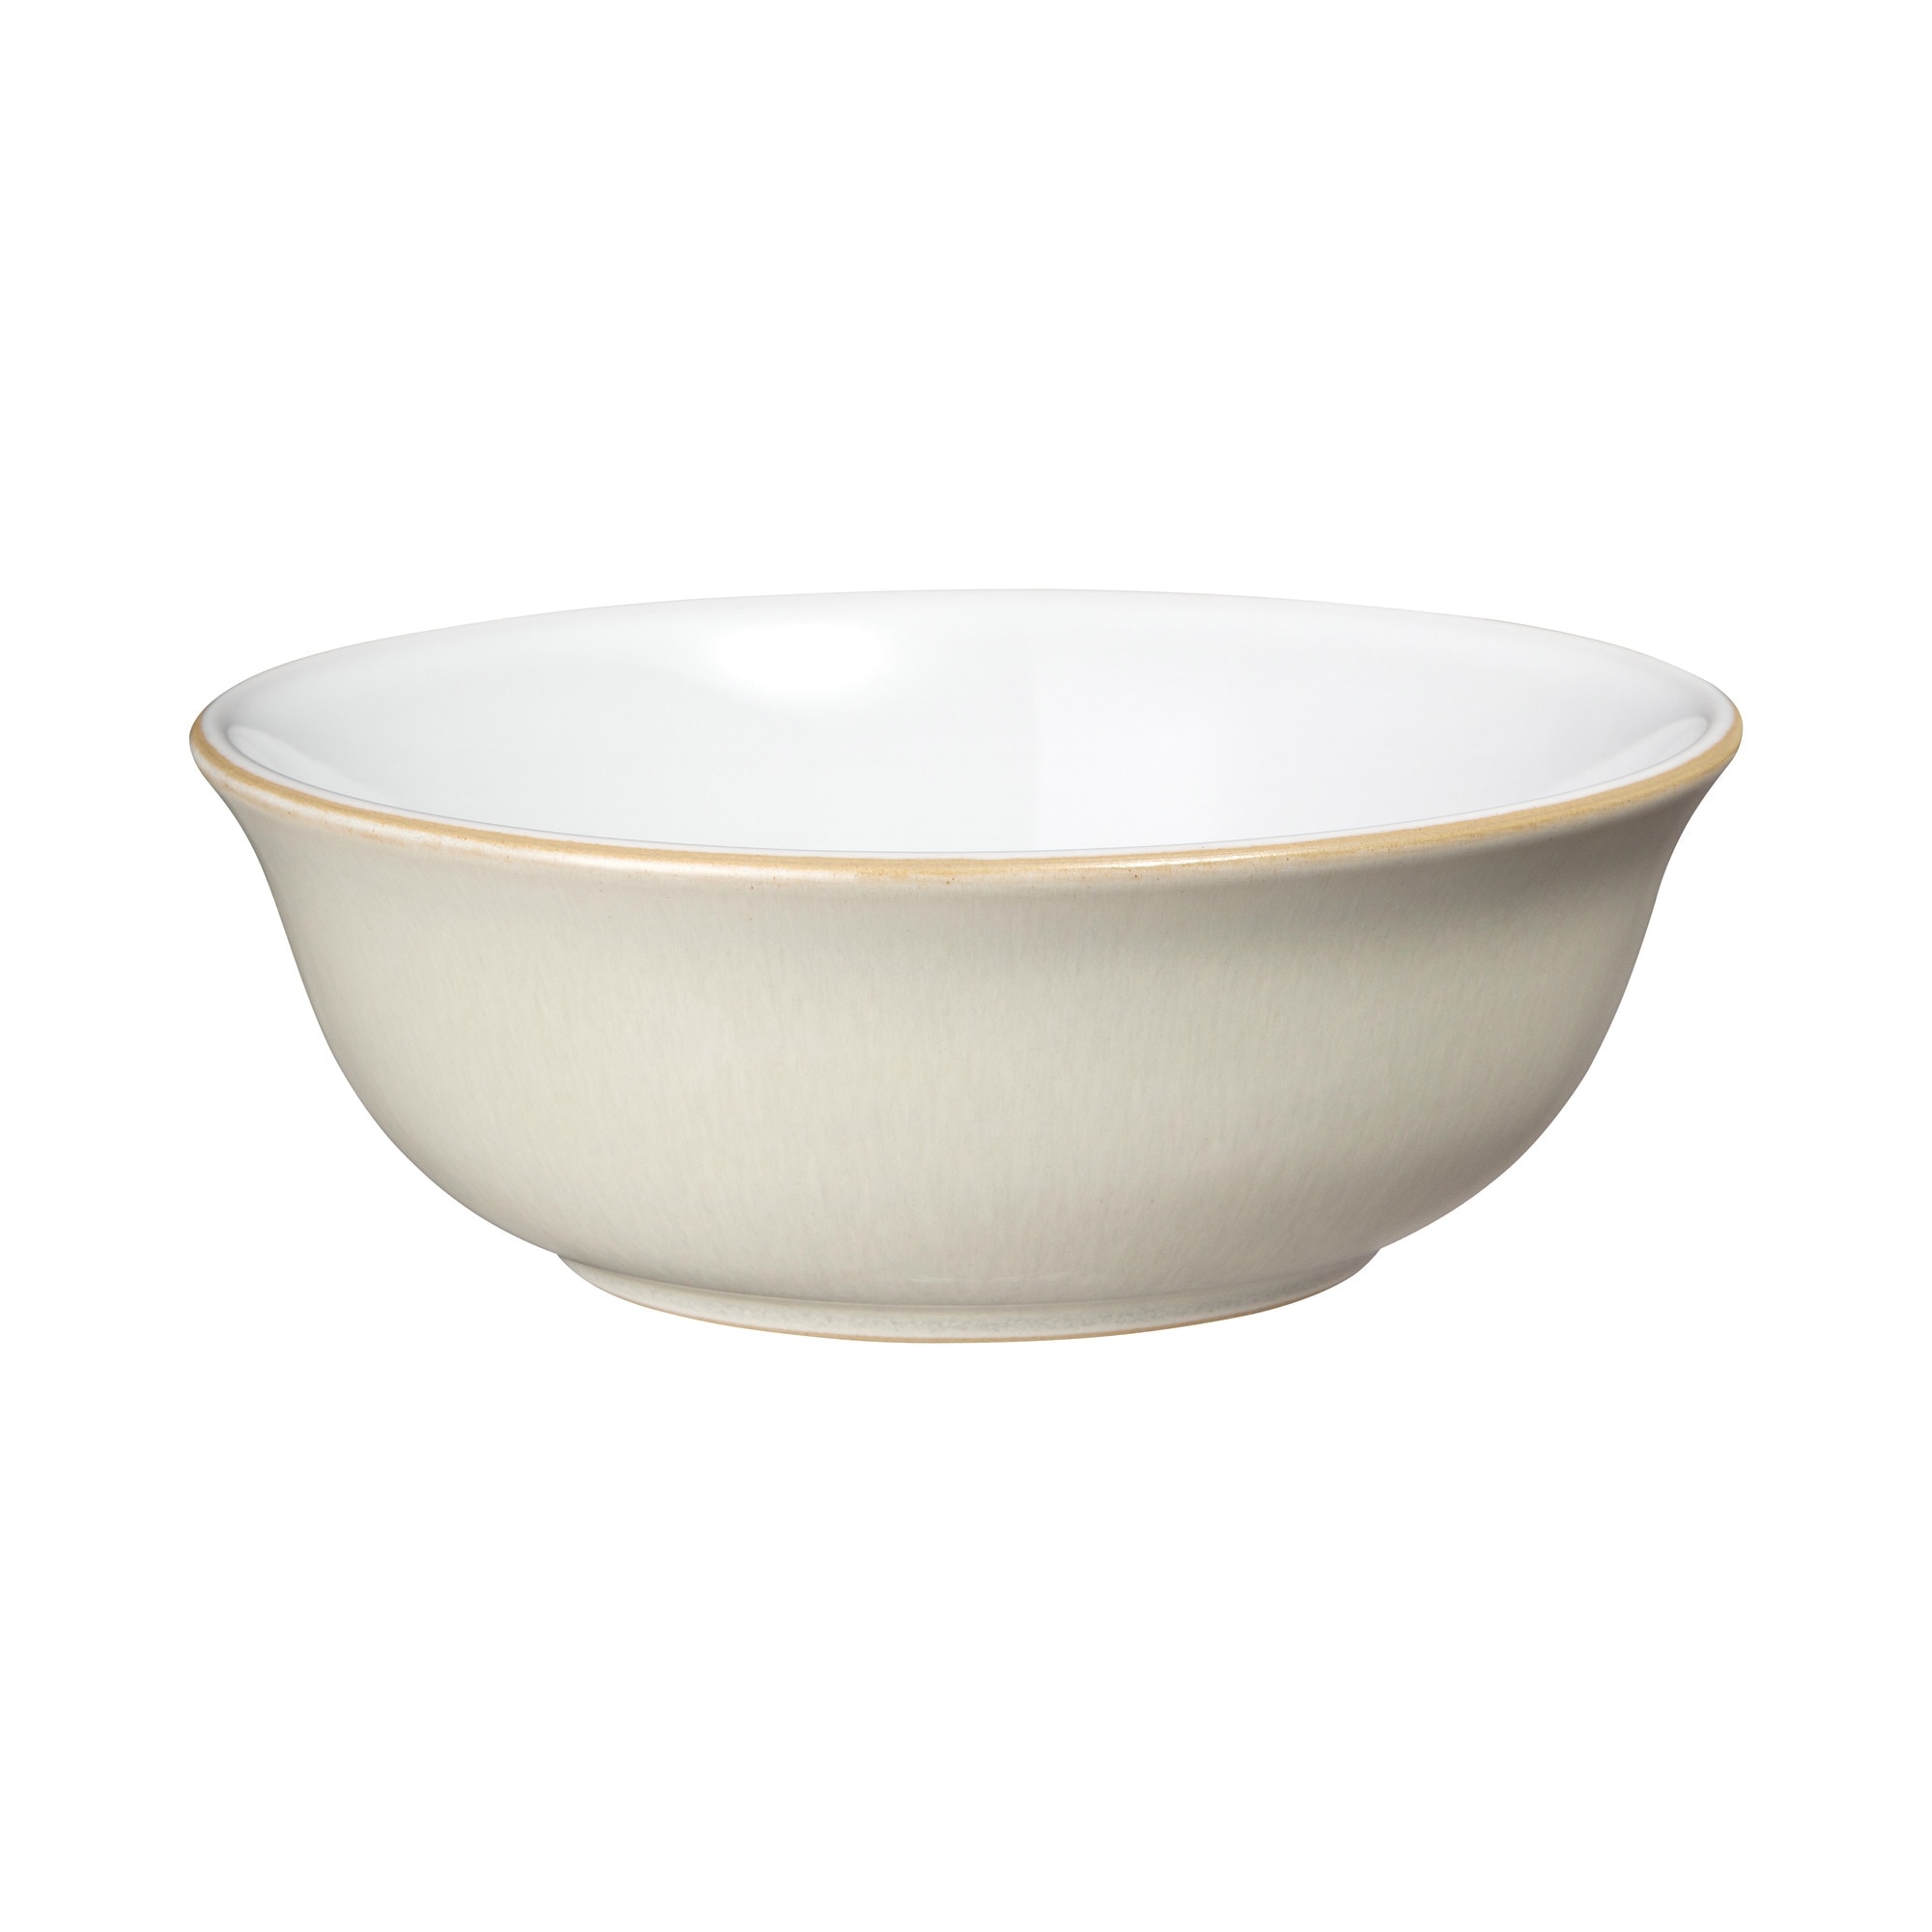 Denby Madrigal cereal bowls rimmed 7.5 inches x 2 